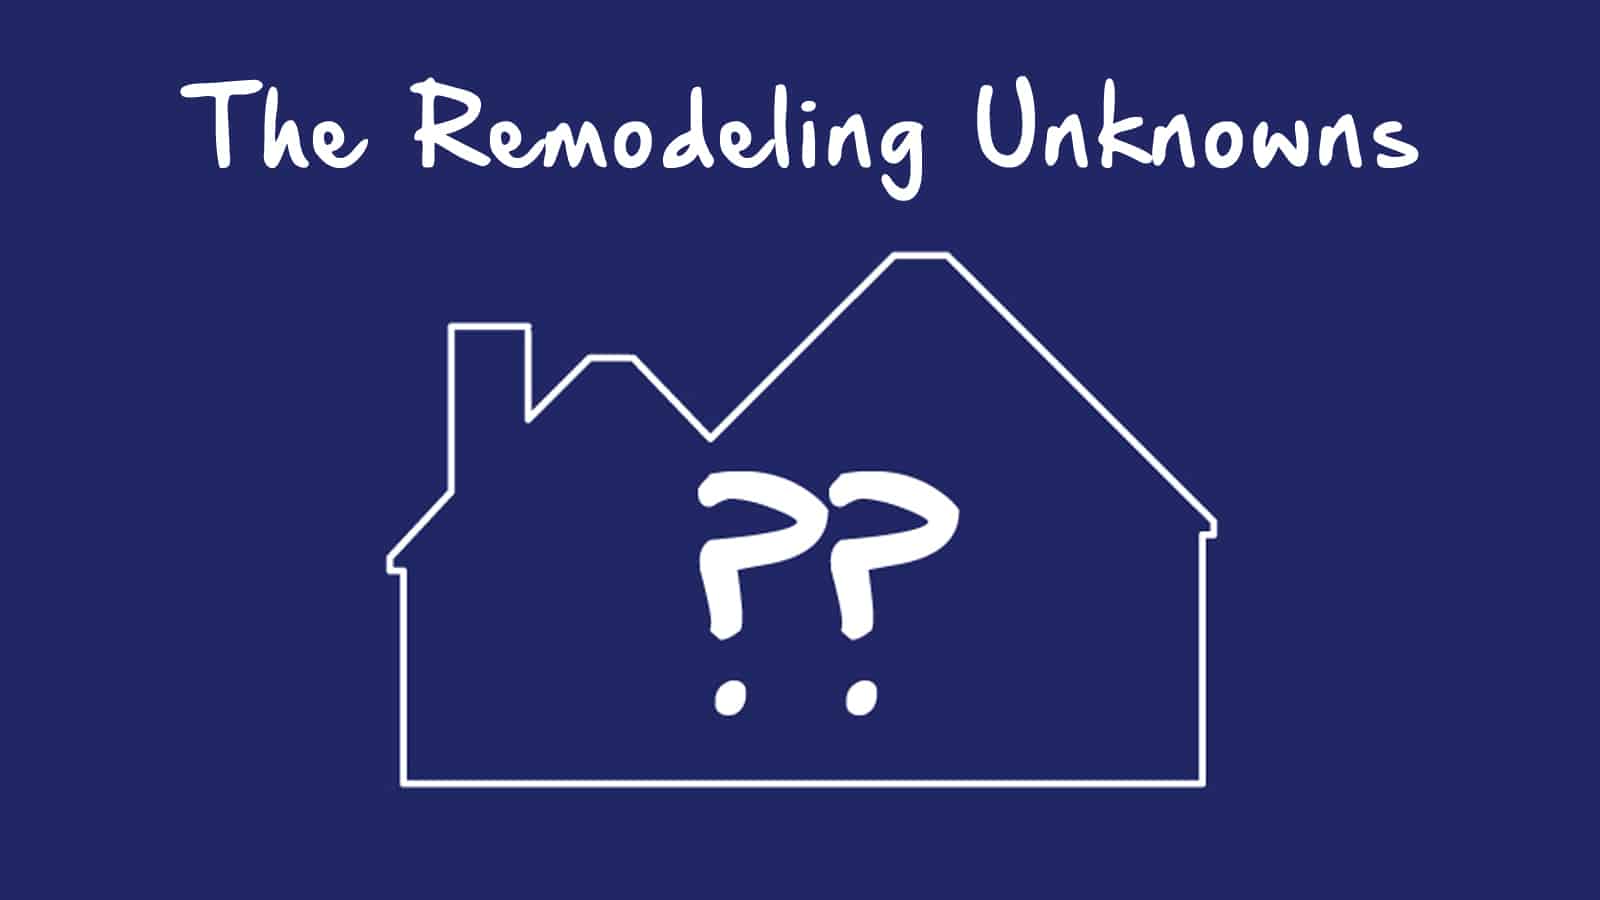 The Remodeling Unknowns